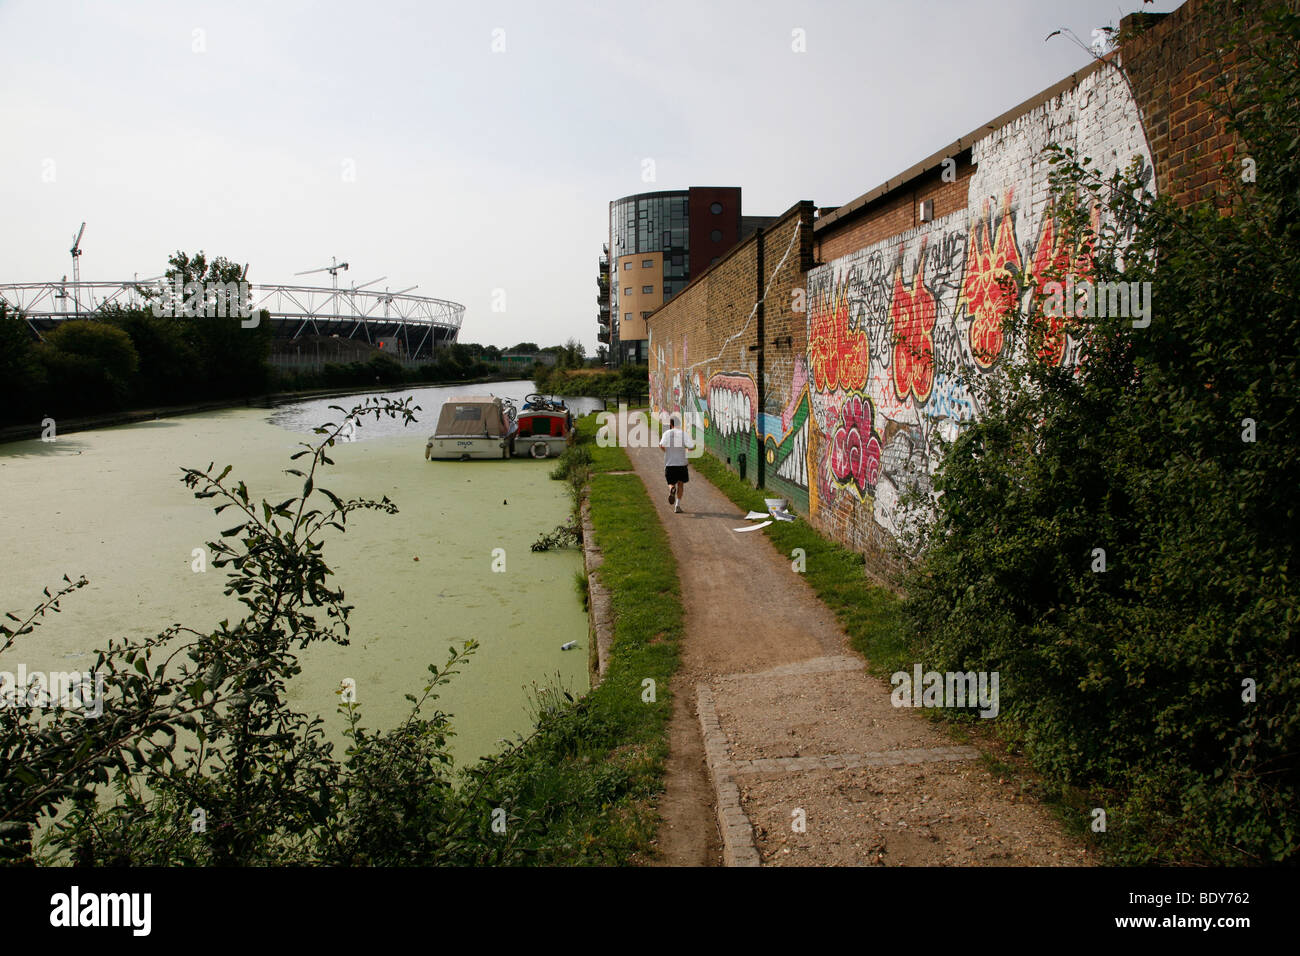 View of the Olympic Stadium from River Lea, Hackney Wick, London, UK Stock Photo